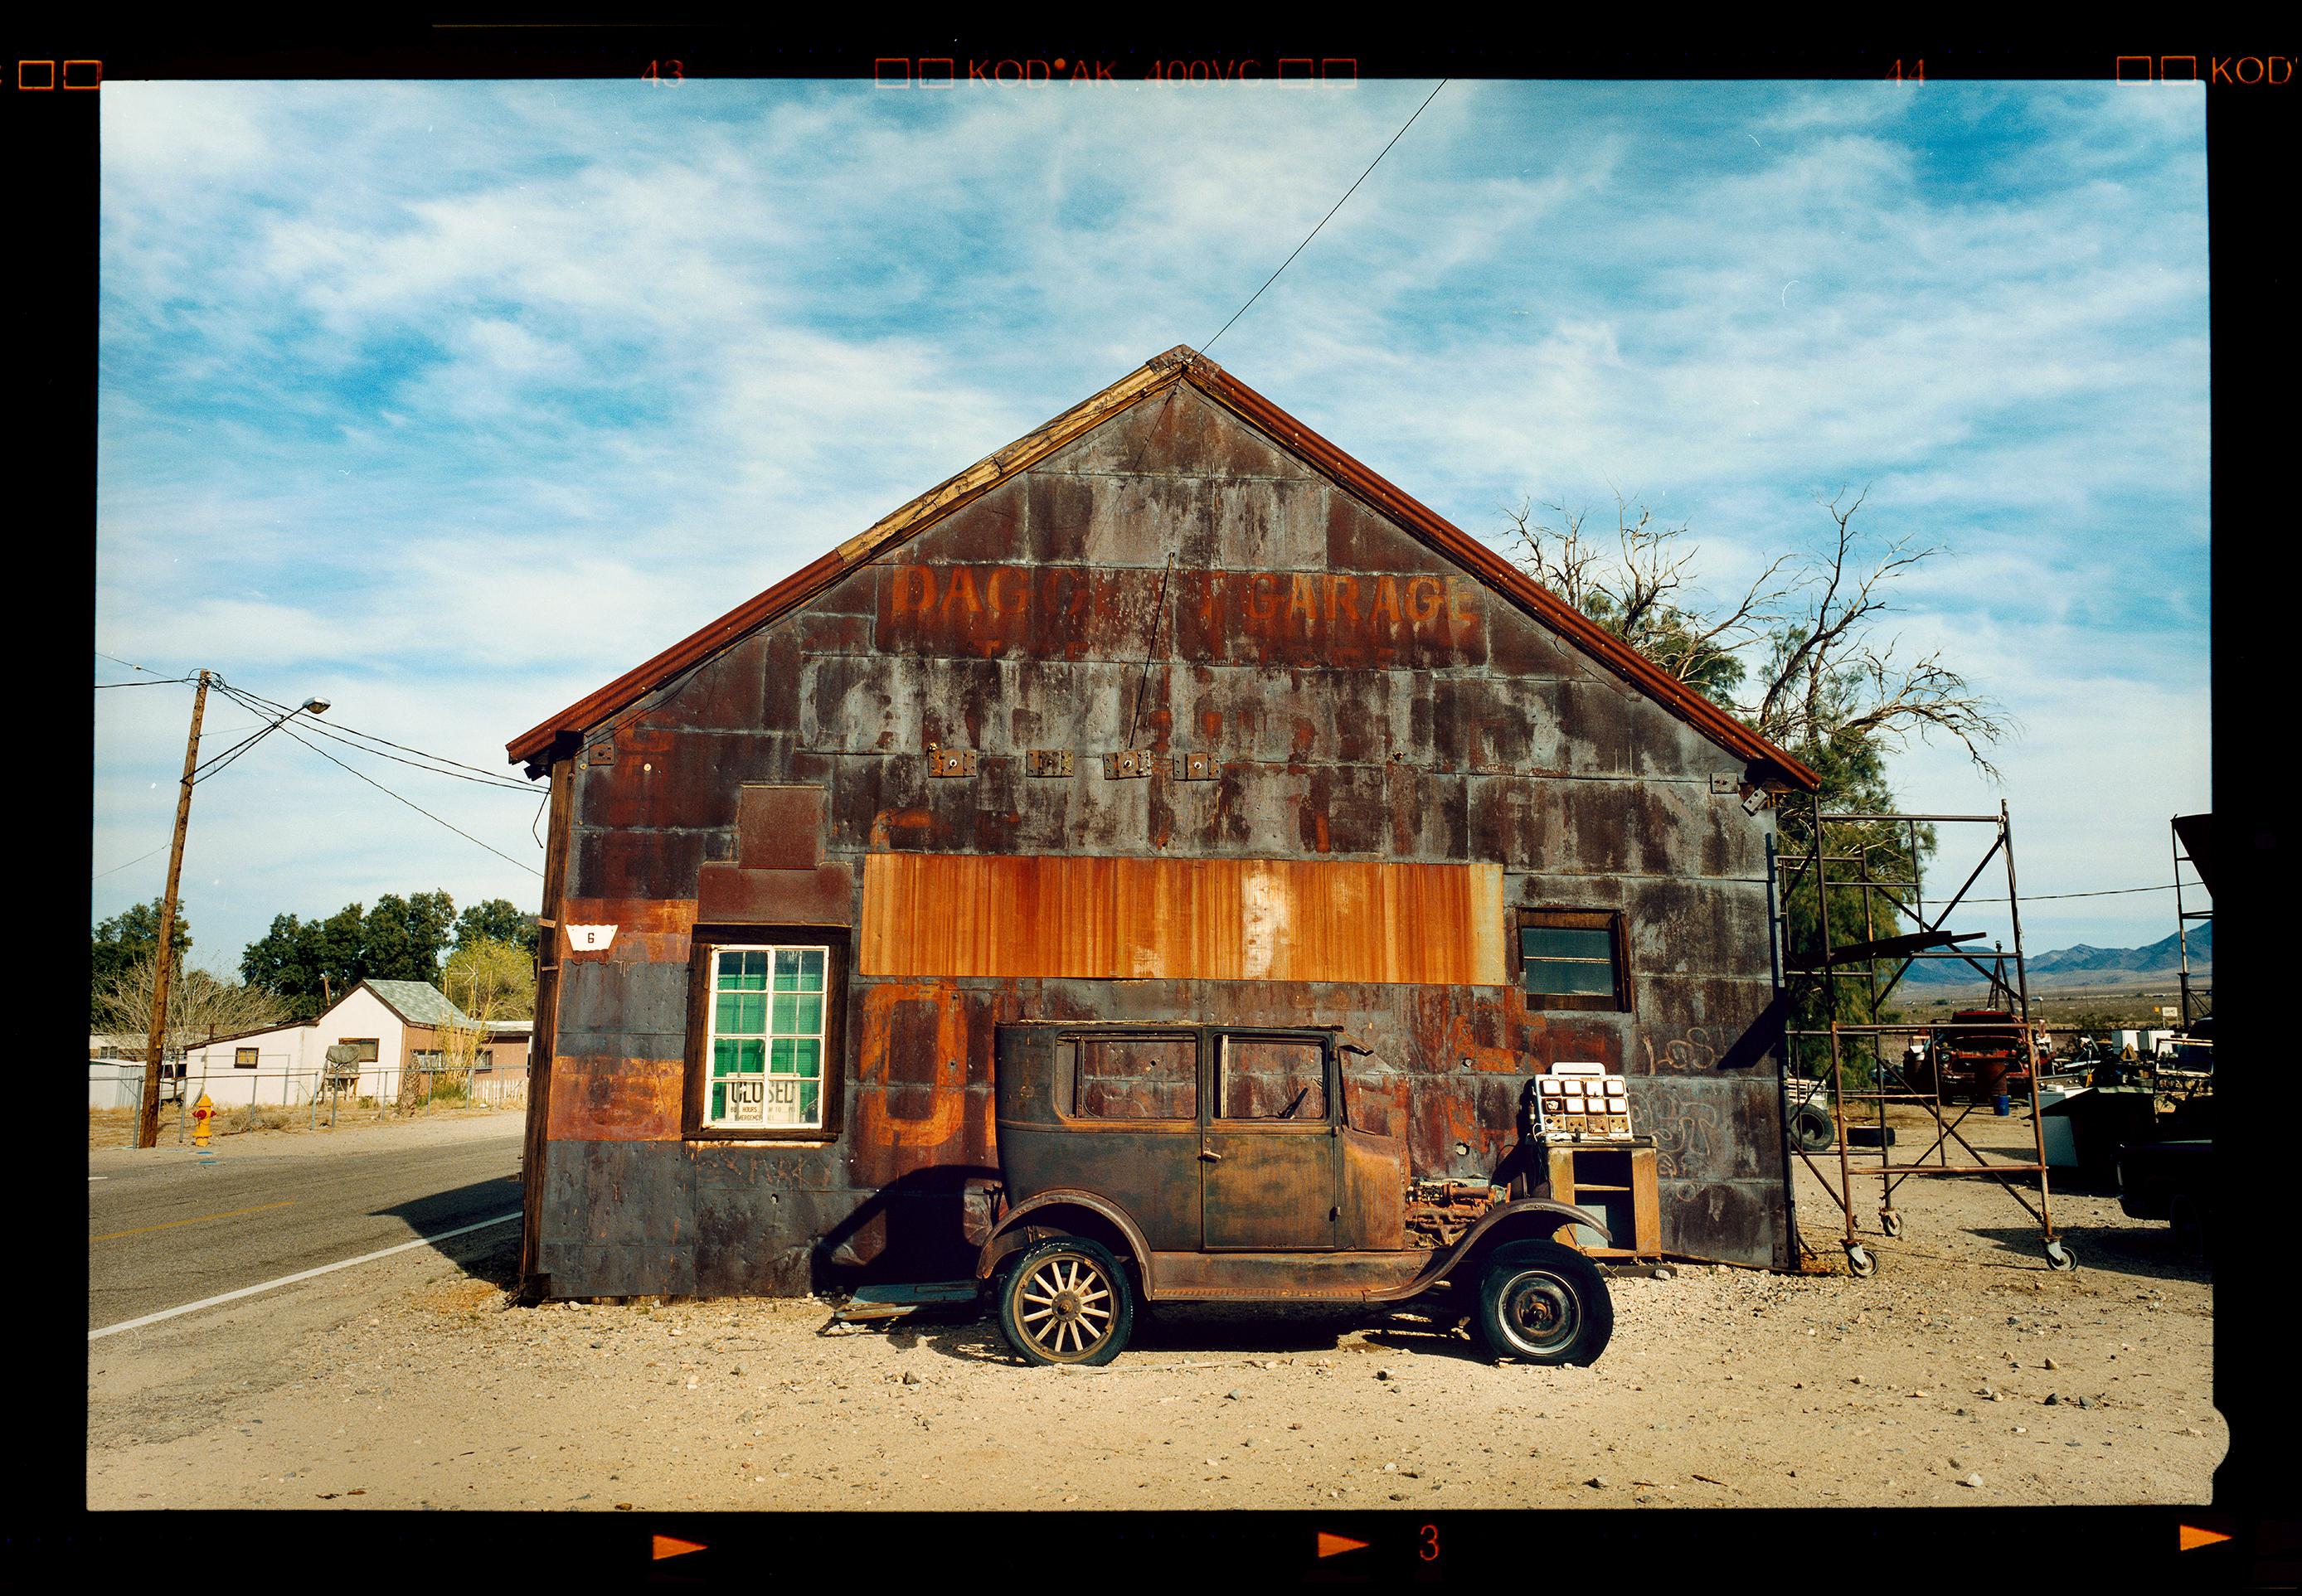 'Model T and Garage' was taken in the small historic town of Daggett in the Mojave Desert on Route 66. This artwork is part of Richard Heeps' 'Dream in Colour' series, which documents his road trip journey from LA to Las Vegas.

This artwork is a